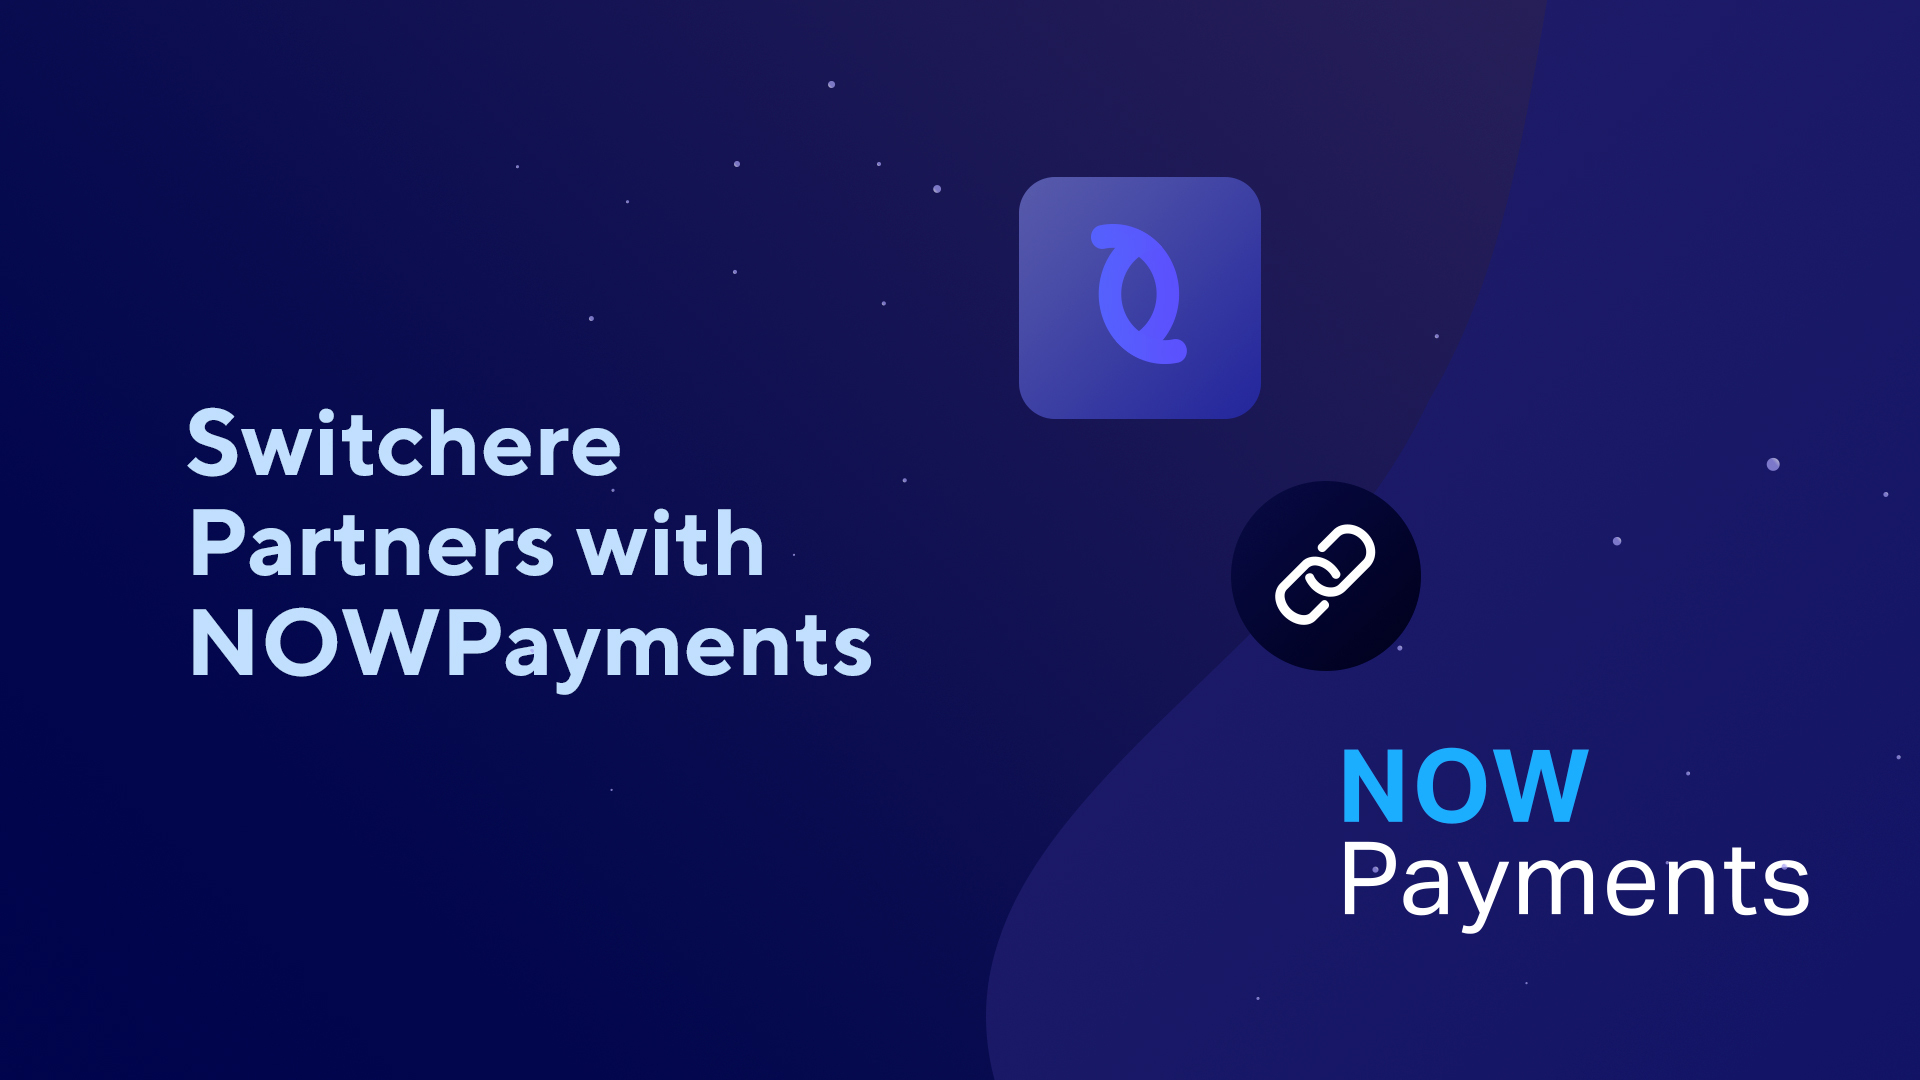 Switchere Partners with NOWPayments